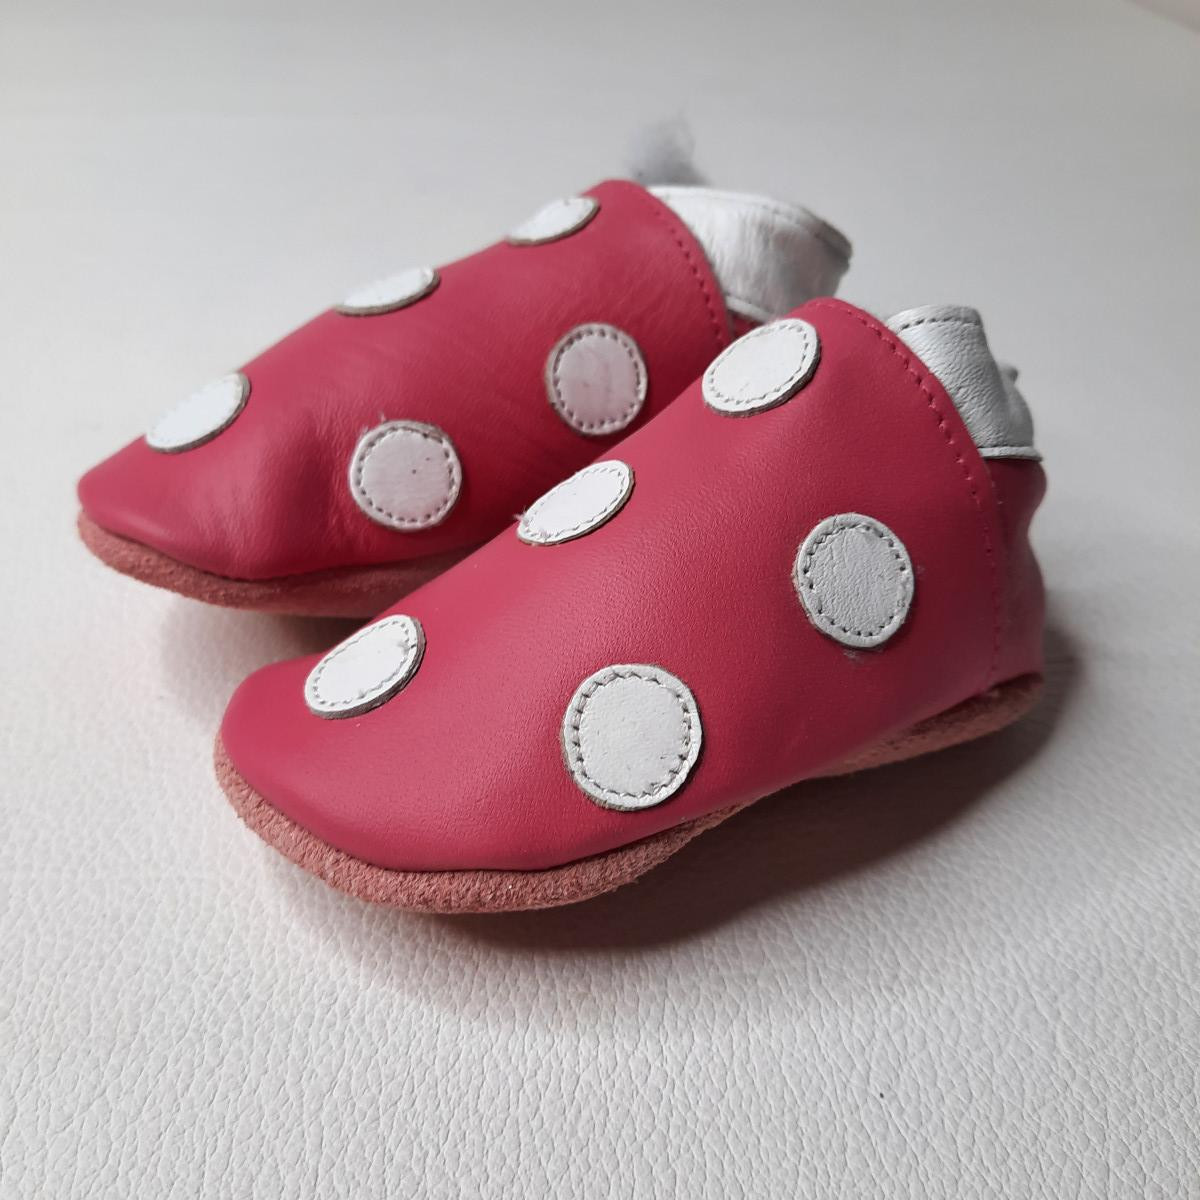 Chaussons en cuir Baby Dutch - Pink white dots - Taille M - photo 6